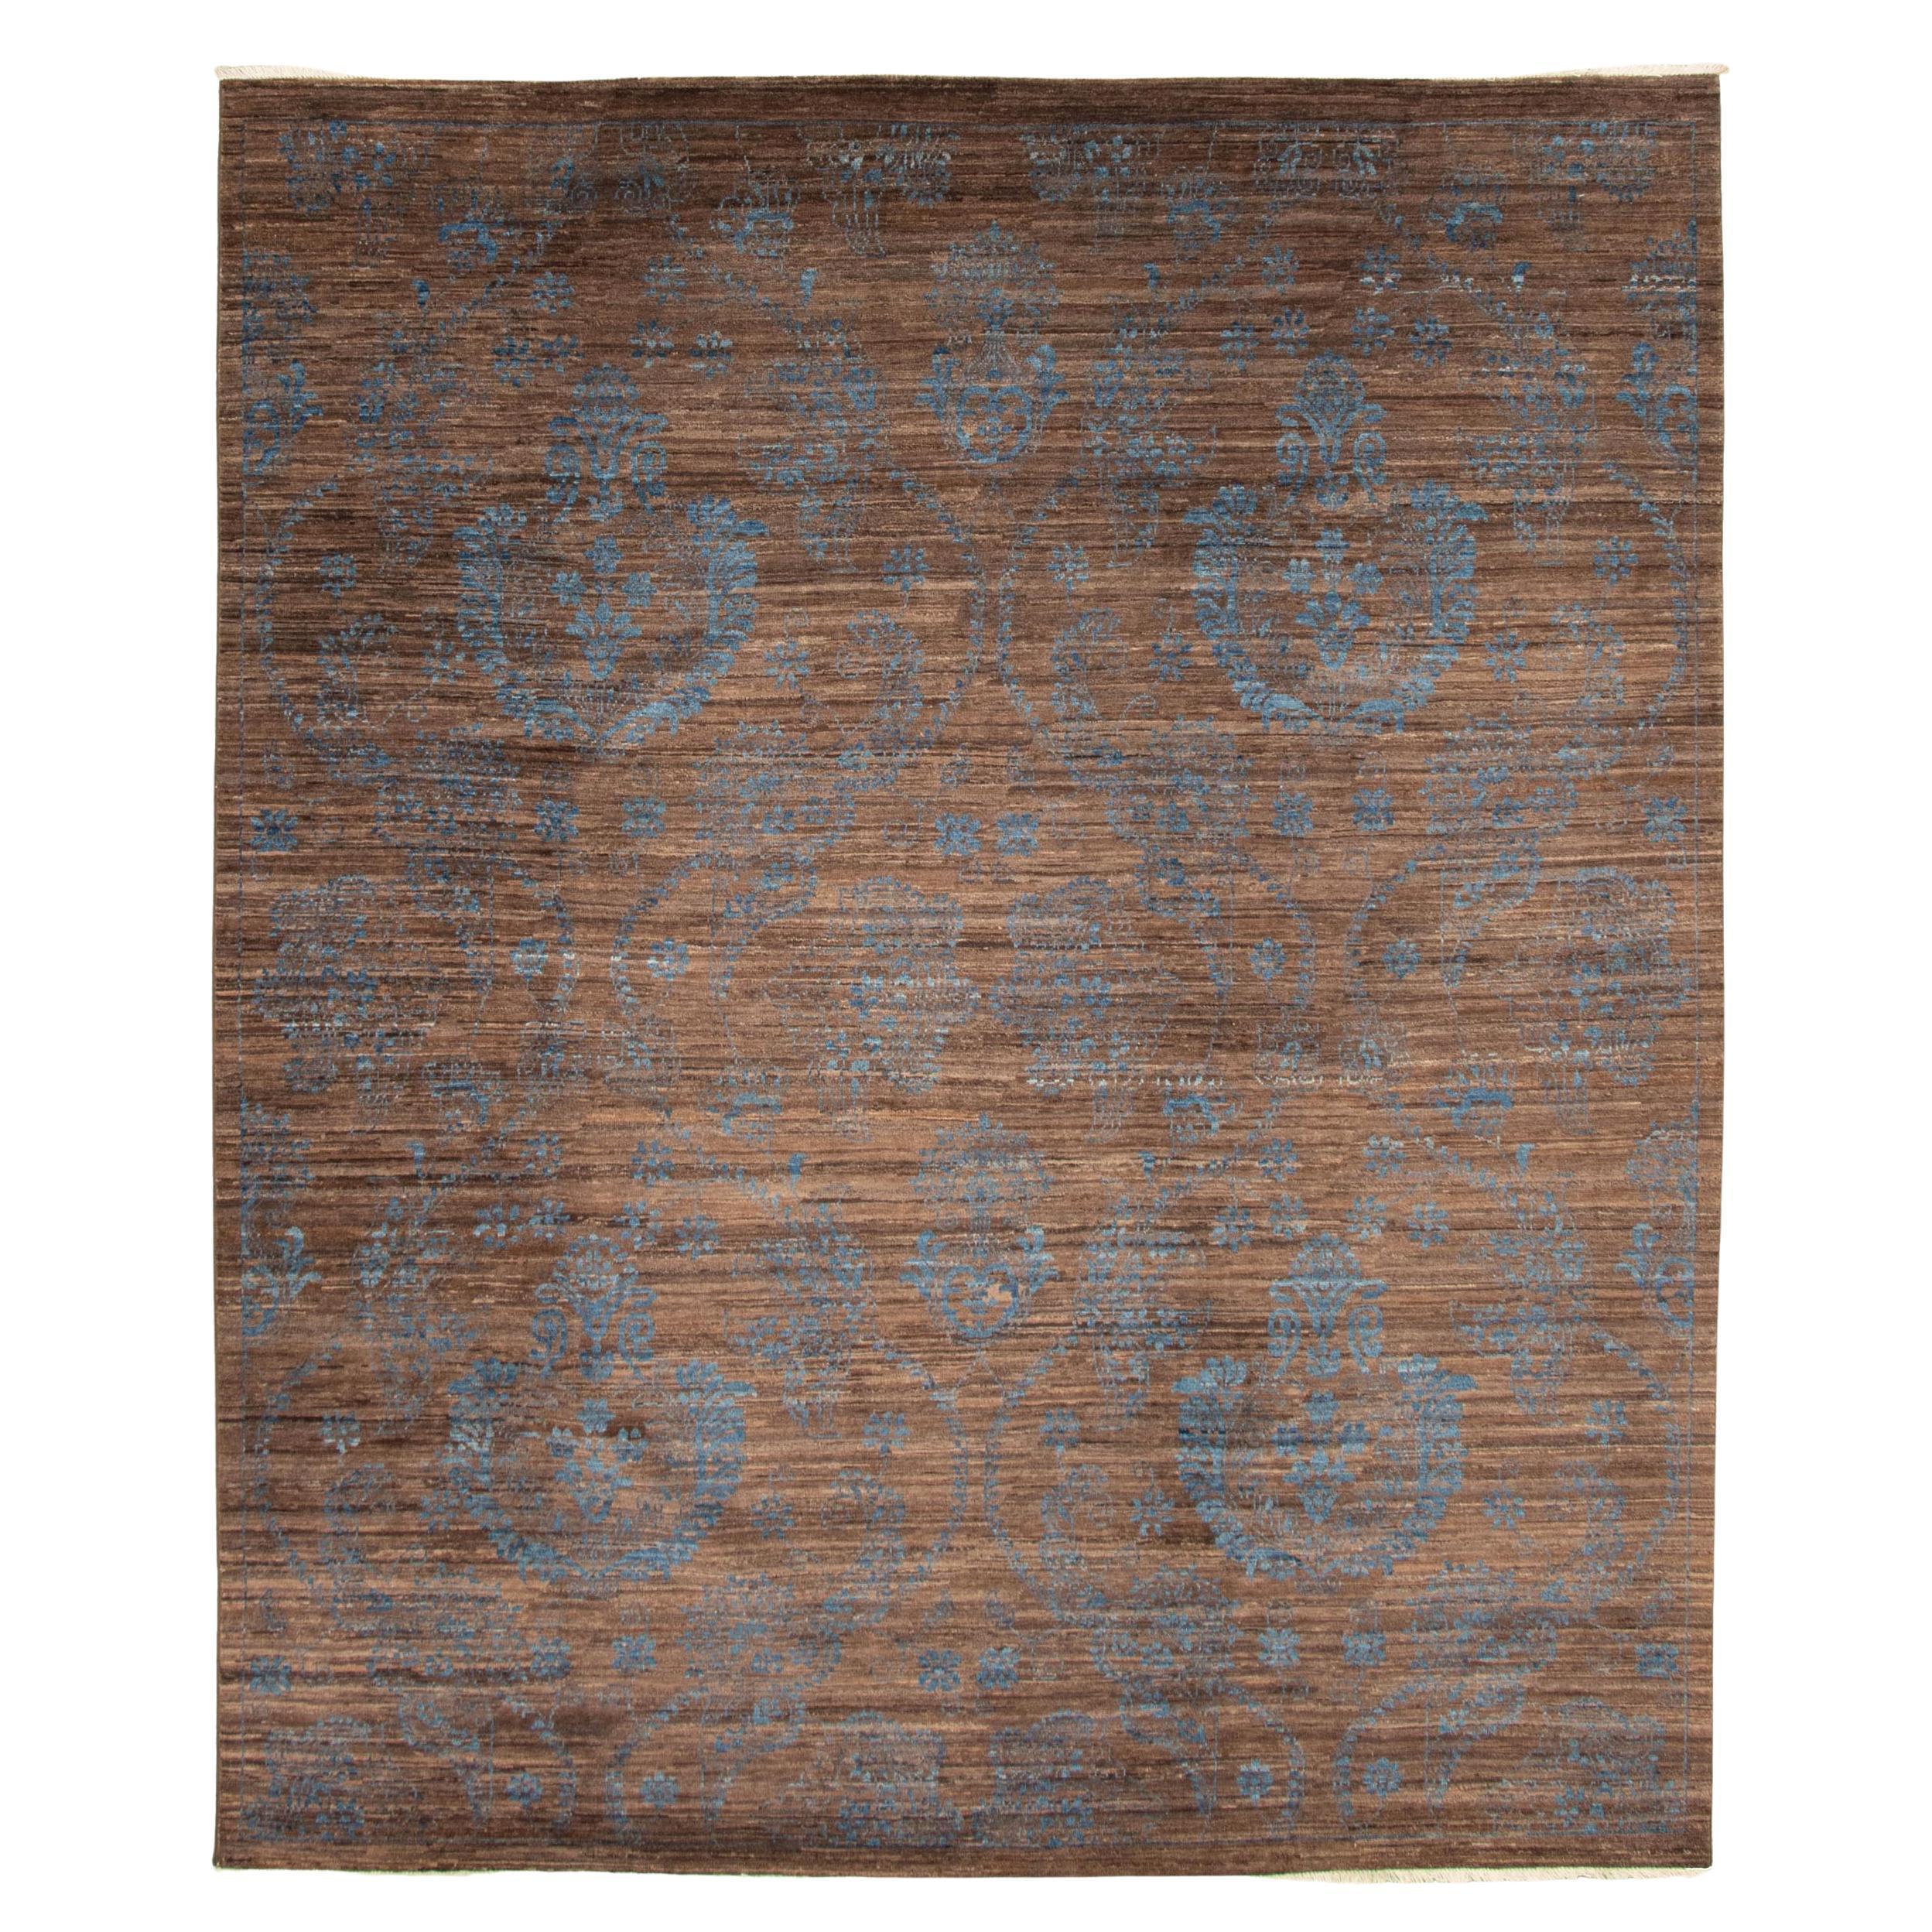 Wool Blue and Brown Persian Rug, 8’ x 10’